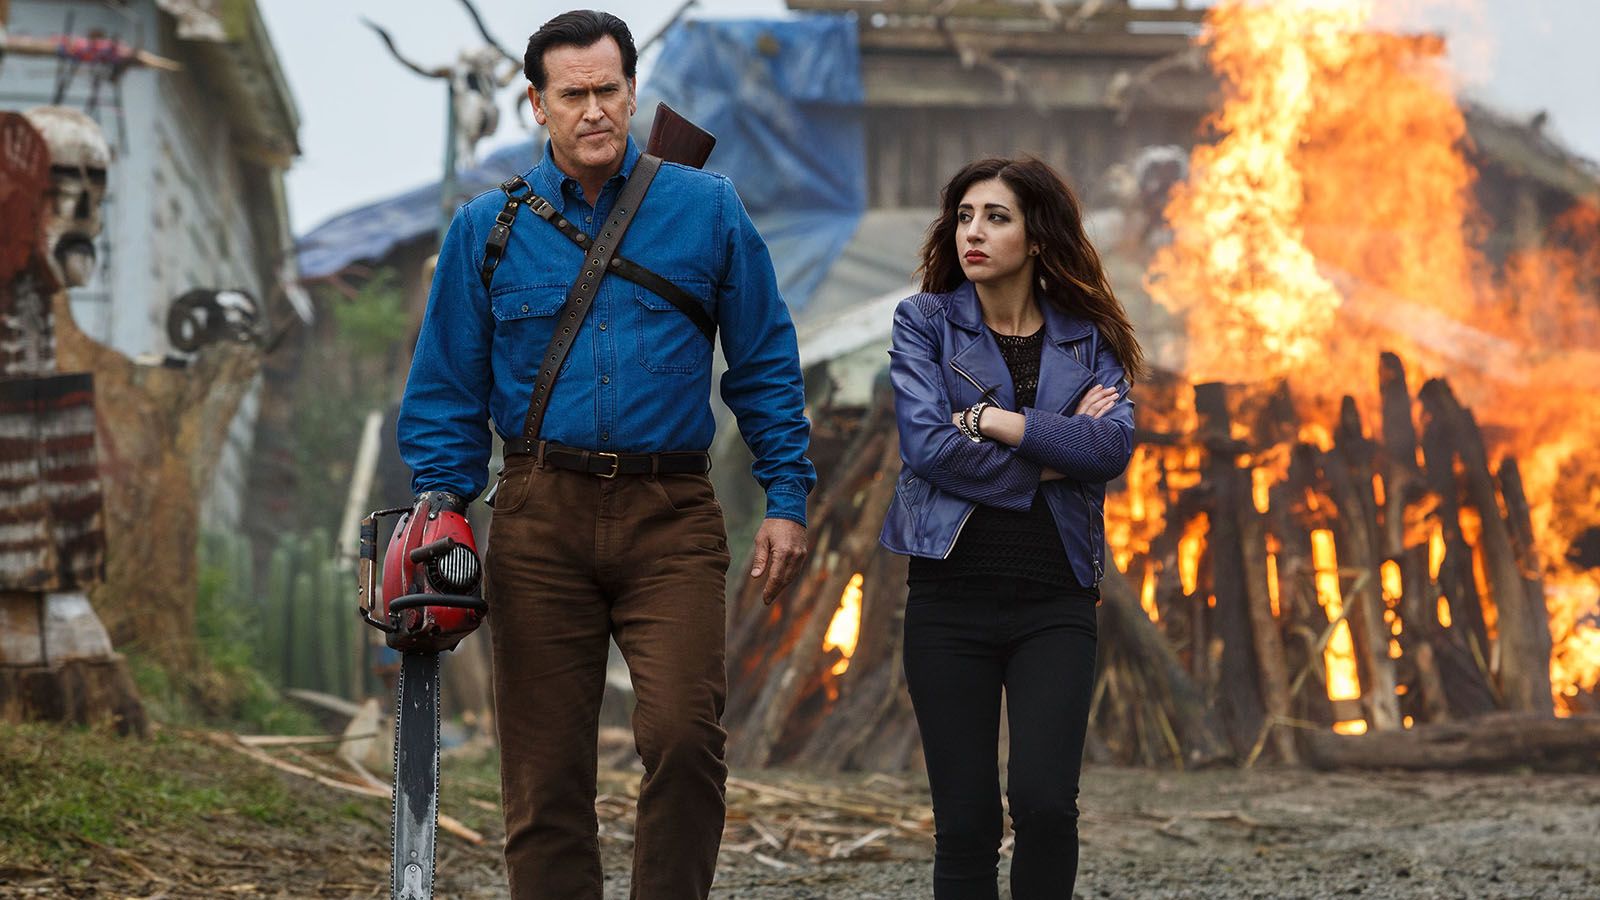 Ash vs. Evil Dead' revives beloved cult-classic horror series in time for  Halloween – The Mercury News